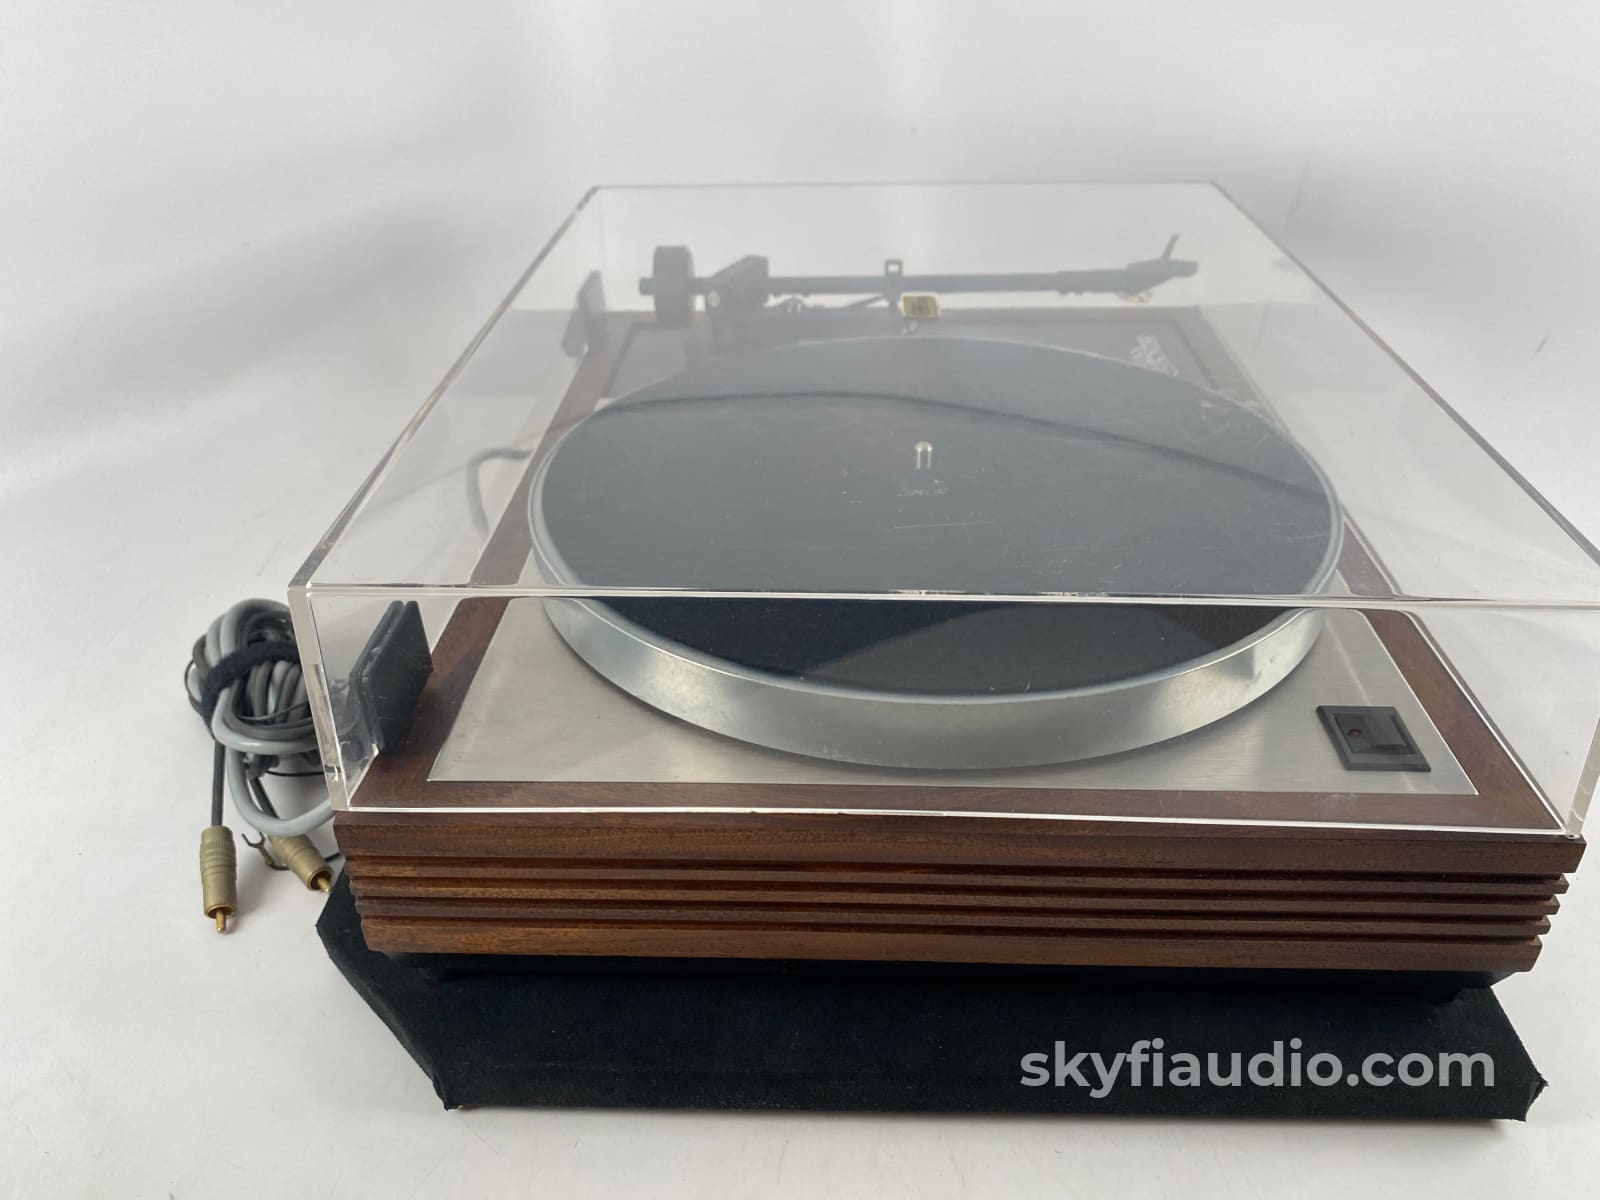 Legendary Linn Lp12 With Basik Plus Tonearm And Just Released Sumiko Blue Point No. 3 Cartridge